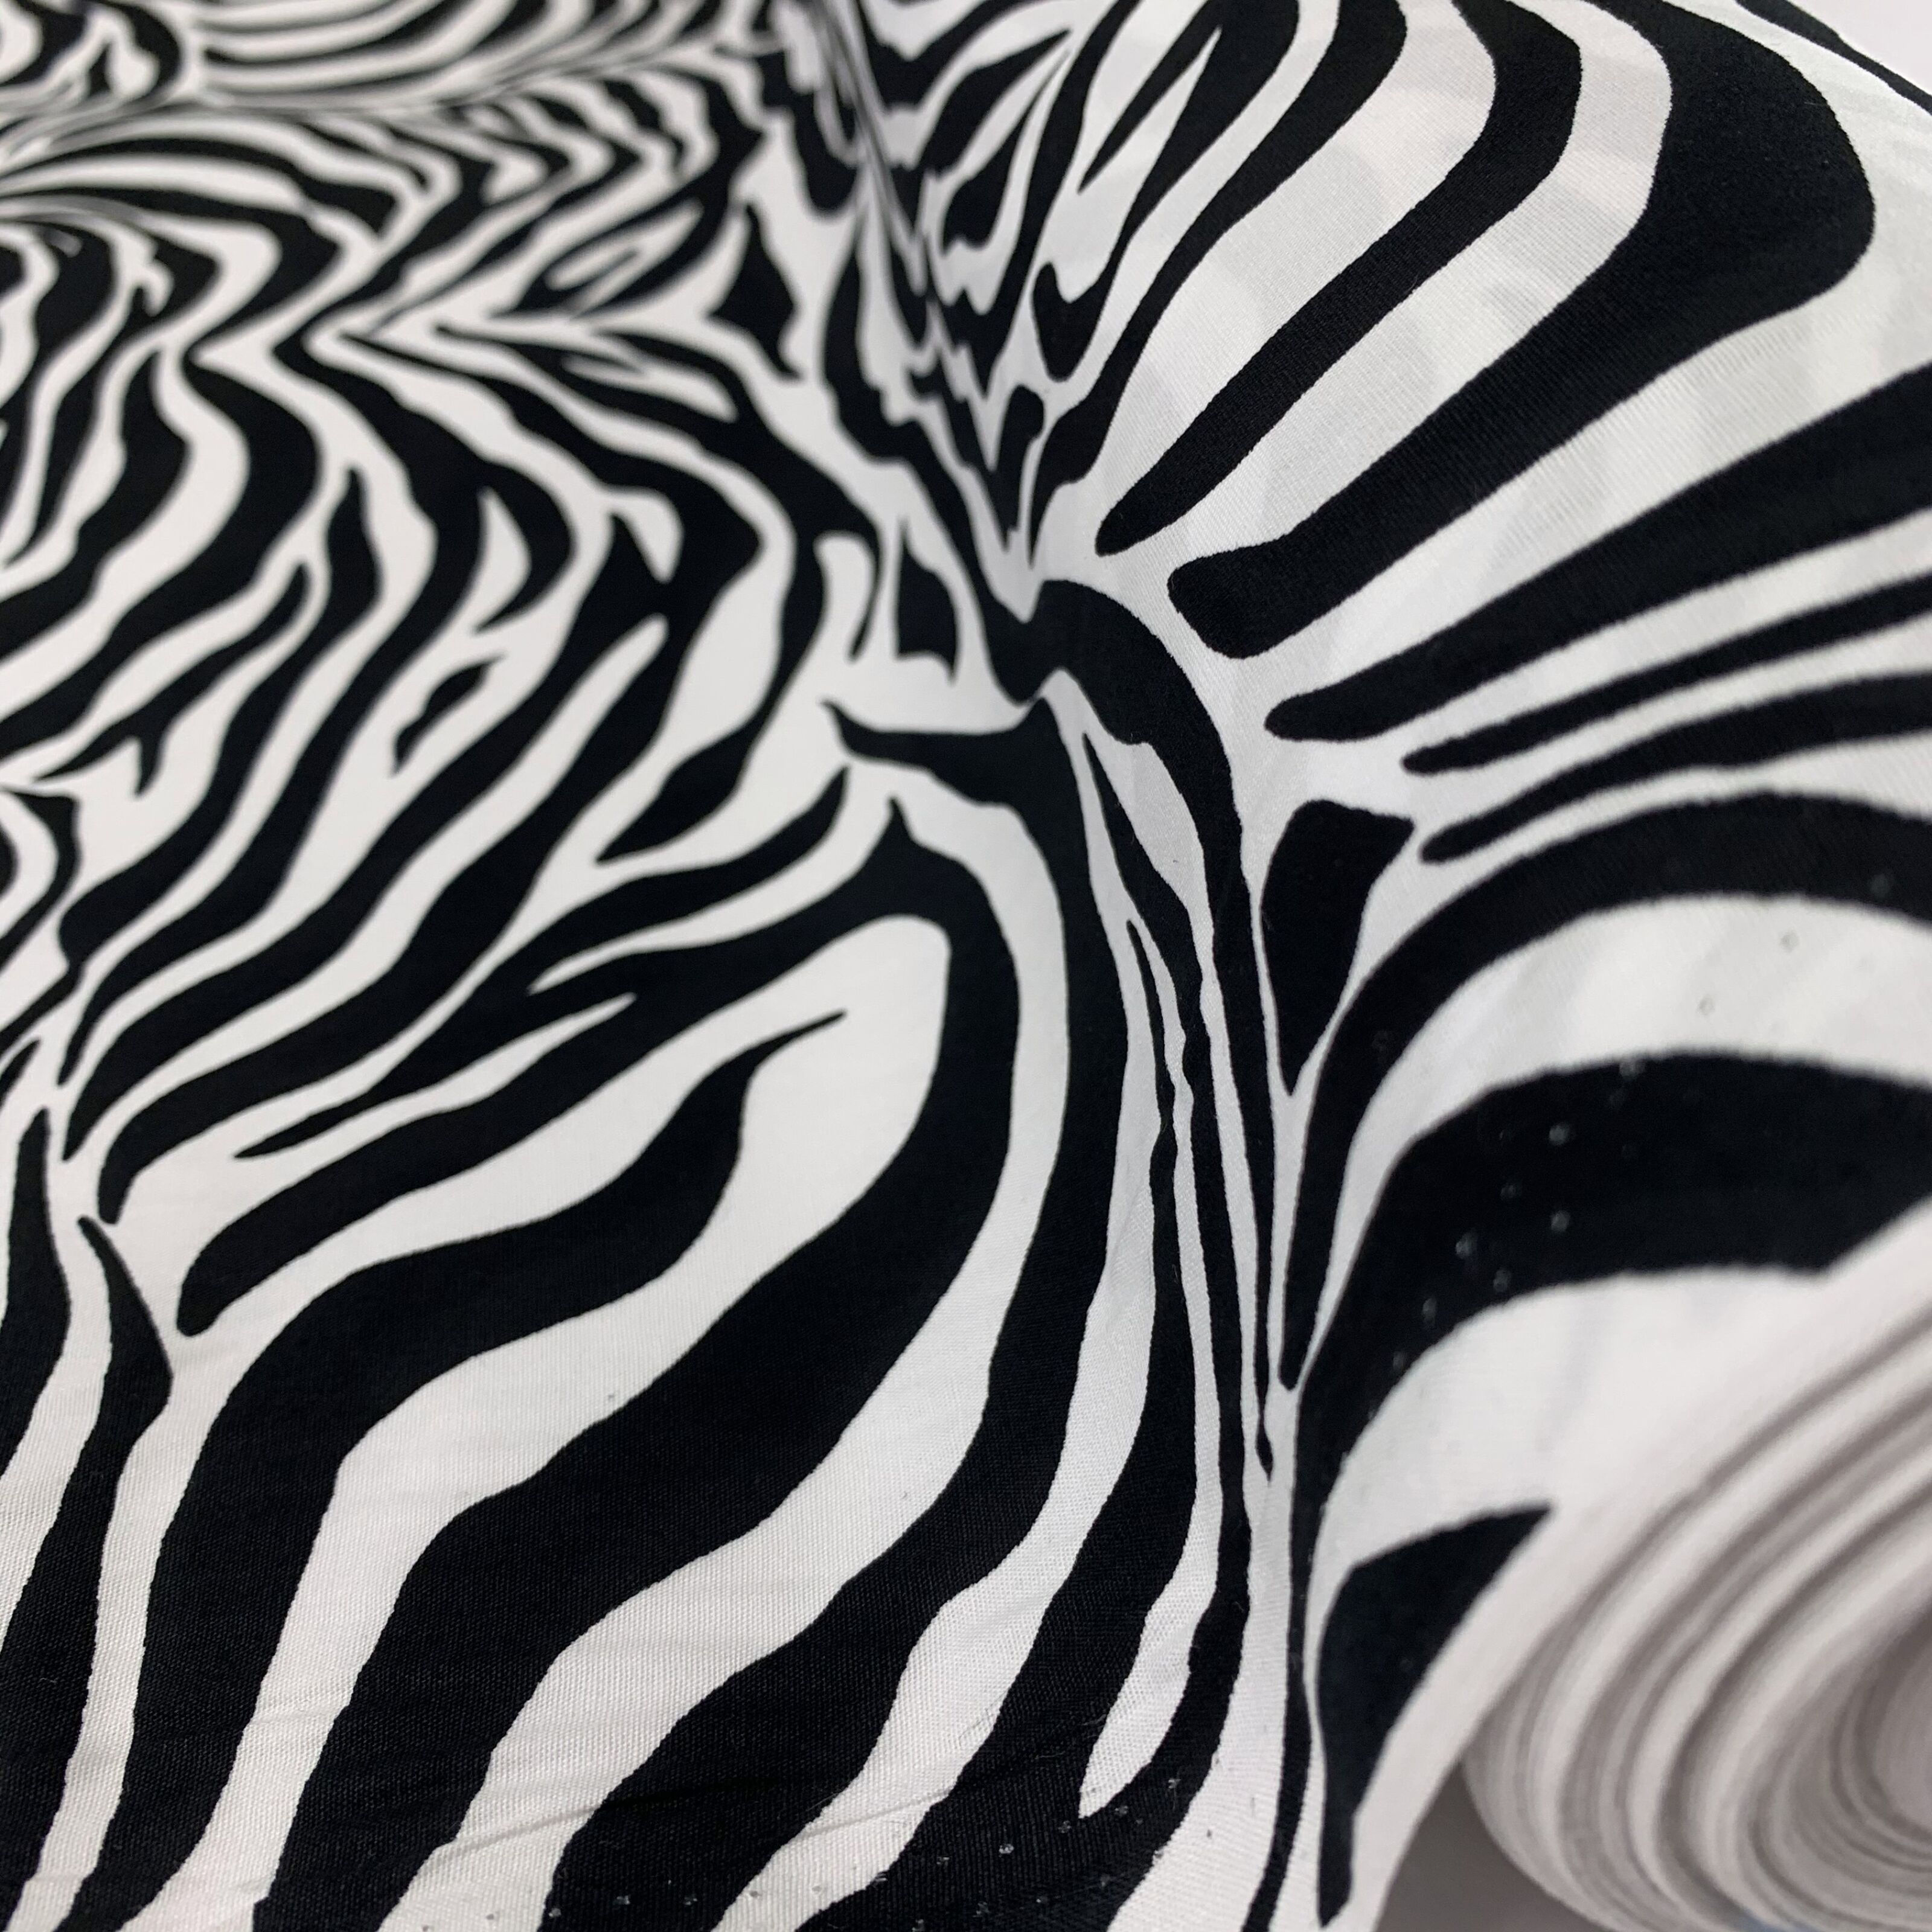 https://www.croftmill.co.uk/images/pictures/scans-of-fabric/00-2020/07-july-2020/poplin-prints-zebra-print-fabric-roll-(gallery).jpg?v=a2a0b058